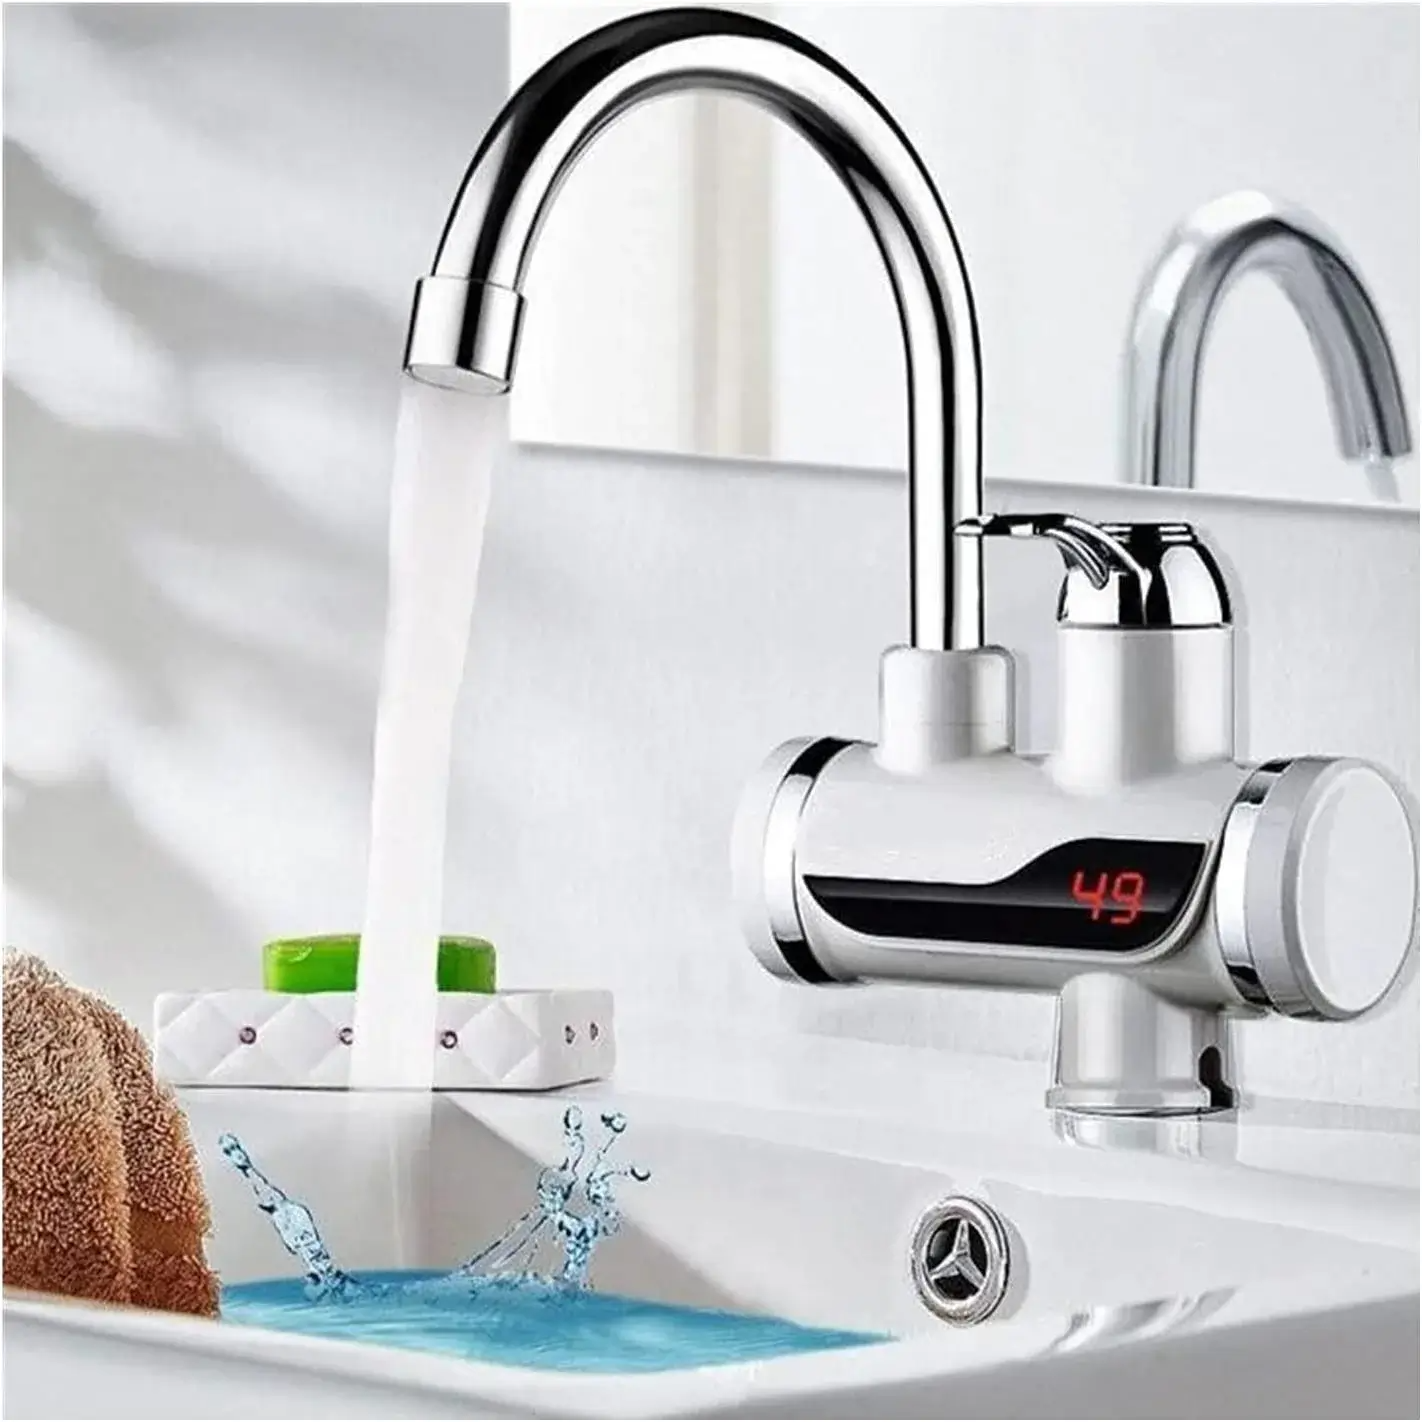 Electric Faucet Water heater